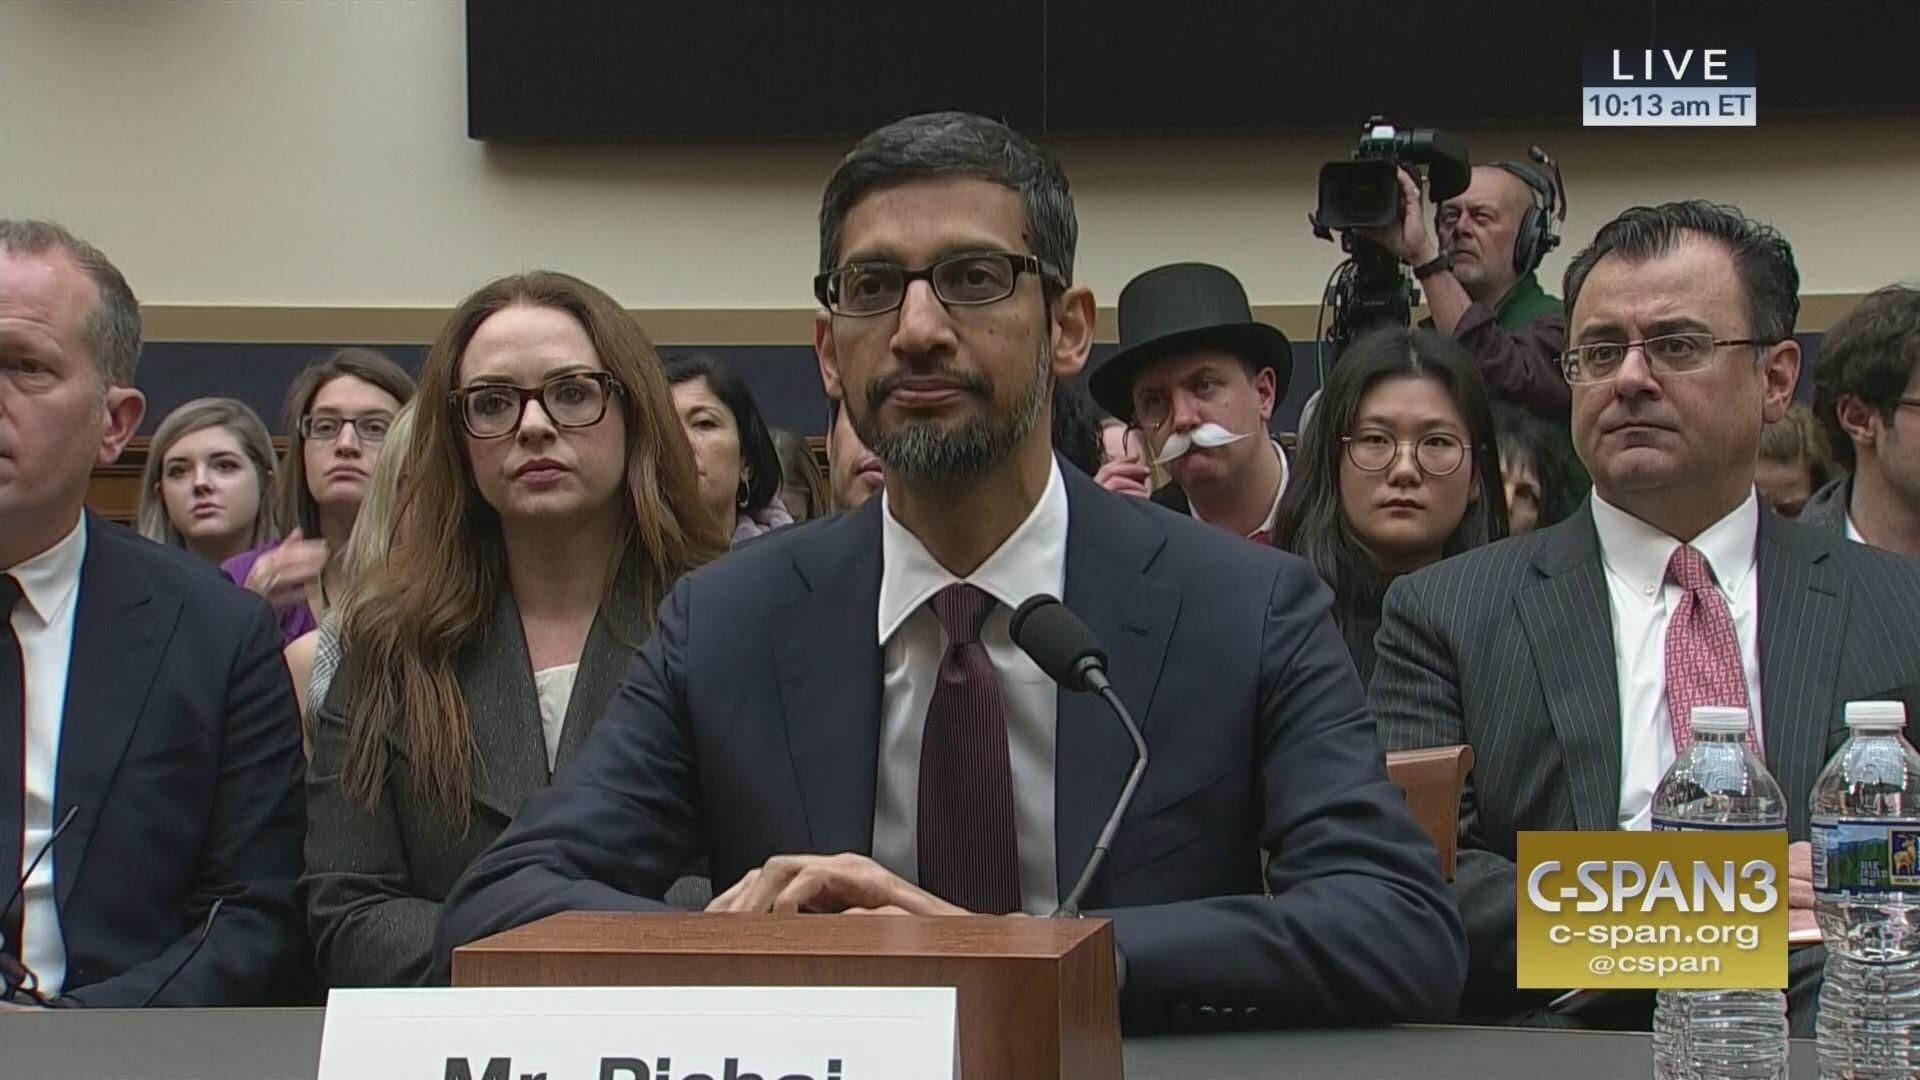 The Monopoly Man makes a comeback at Google CEO’s hearing.